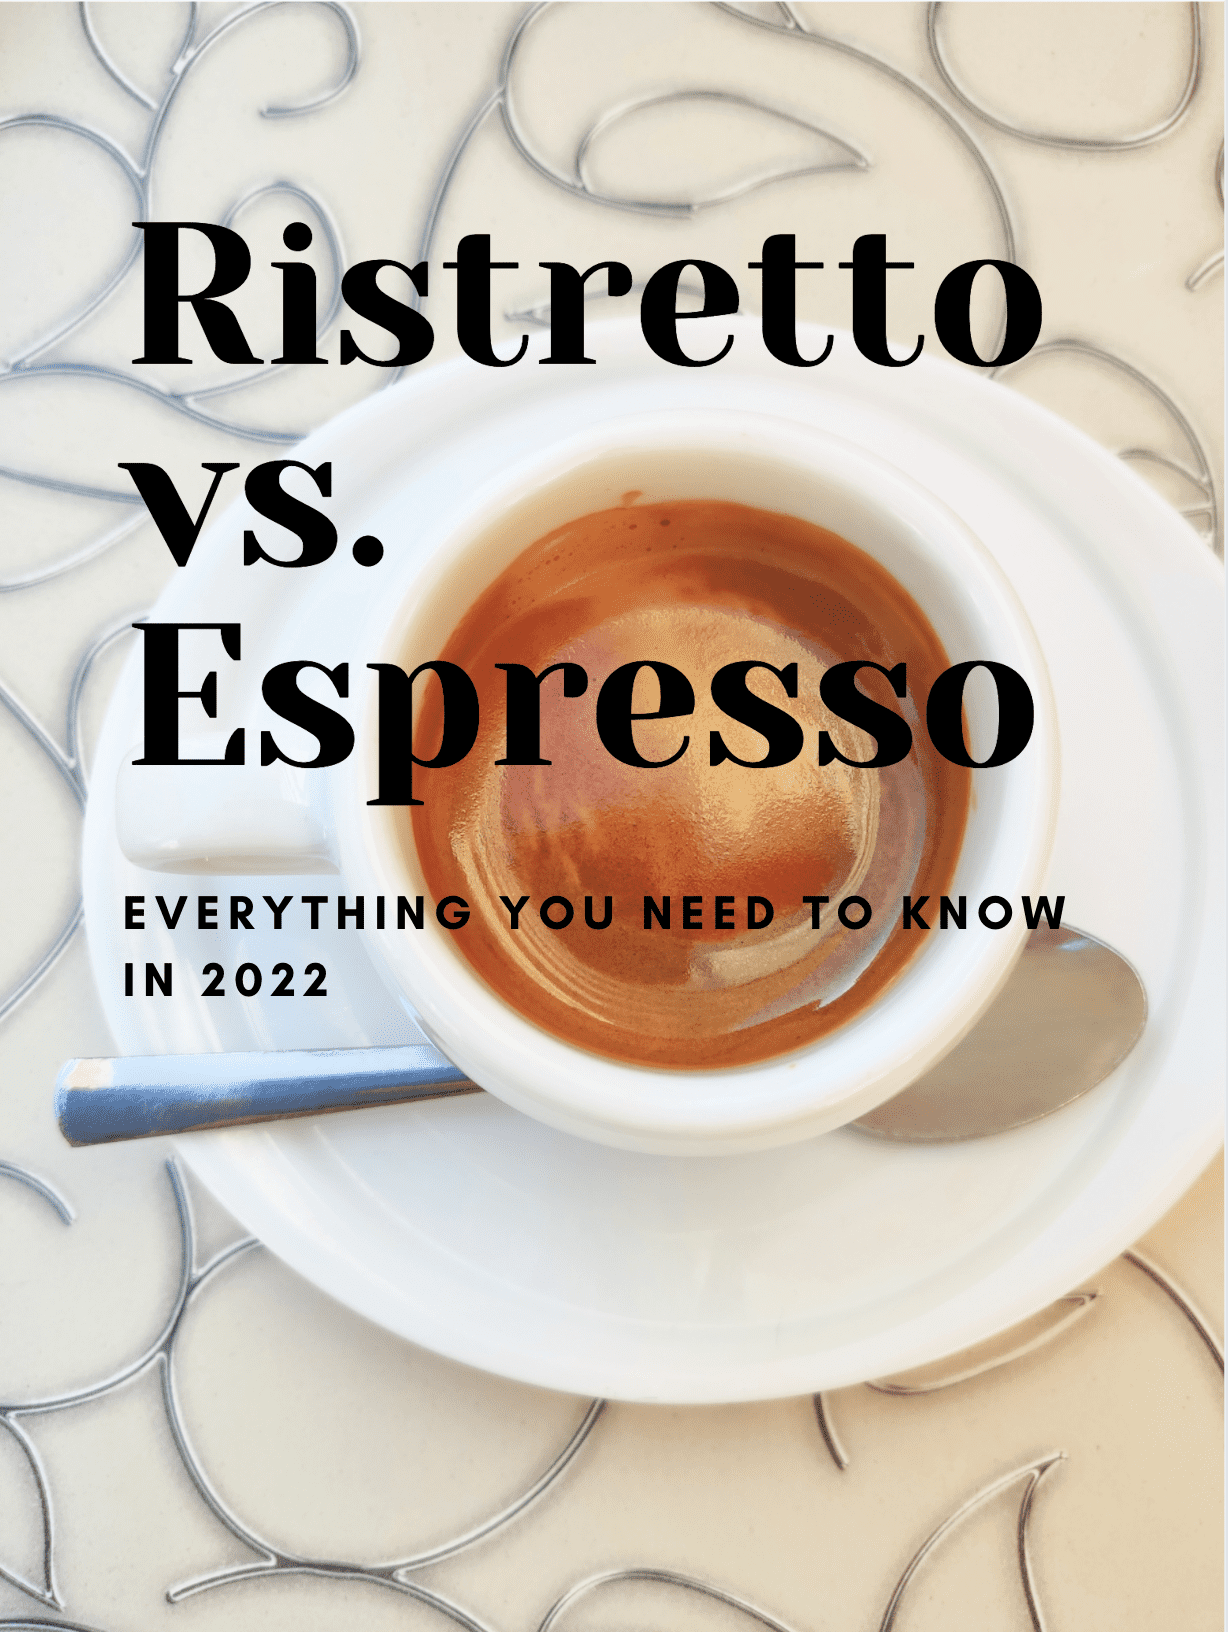 Ristretto vs. Espresso: Everything you need to know in 2022